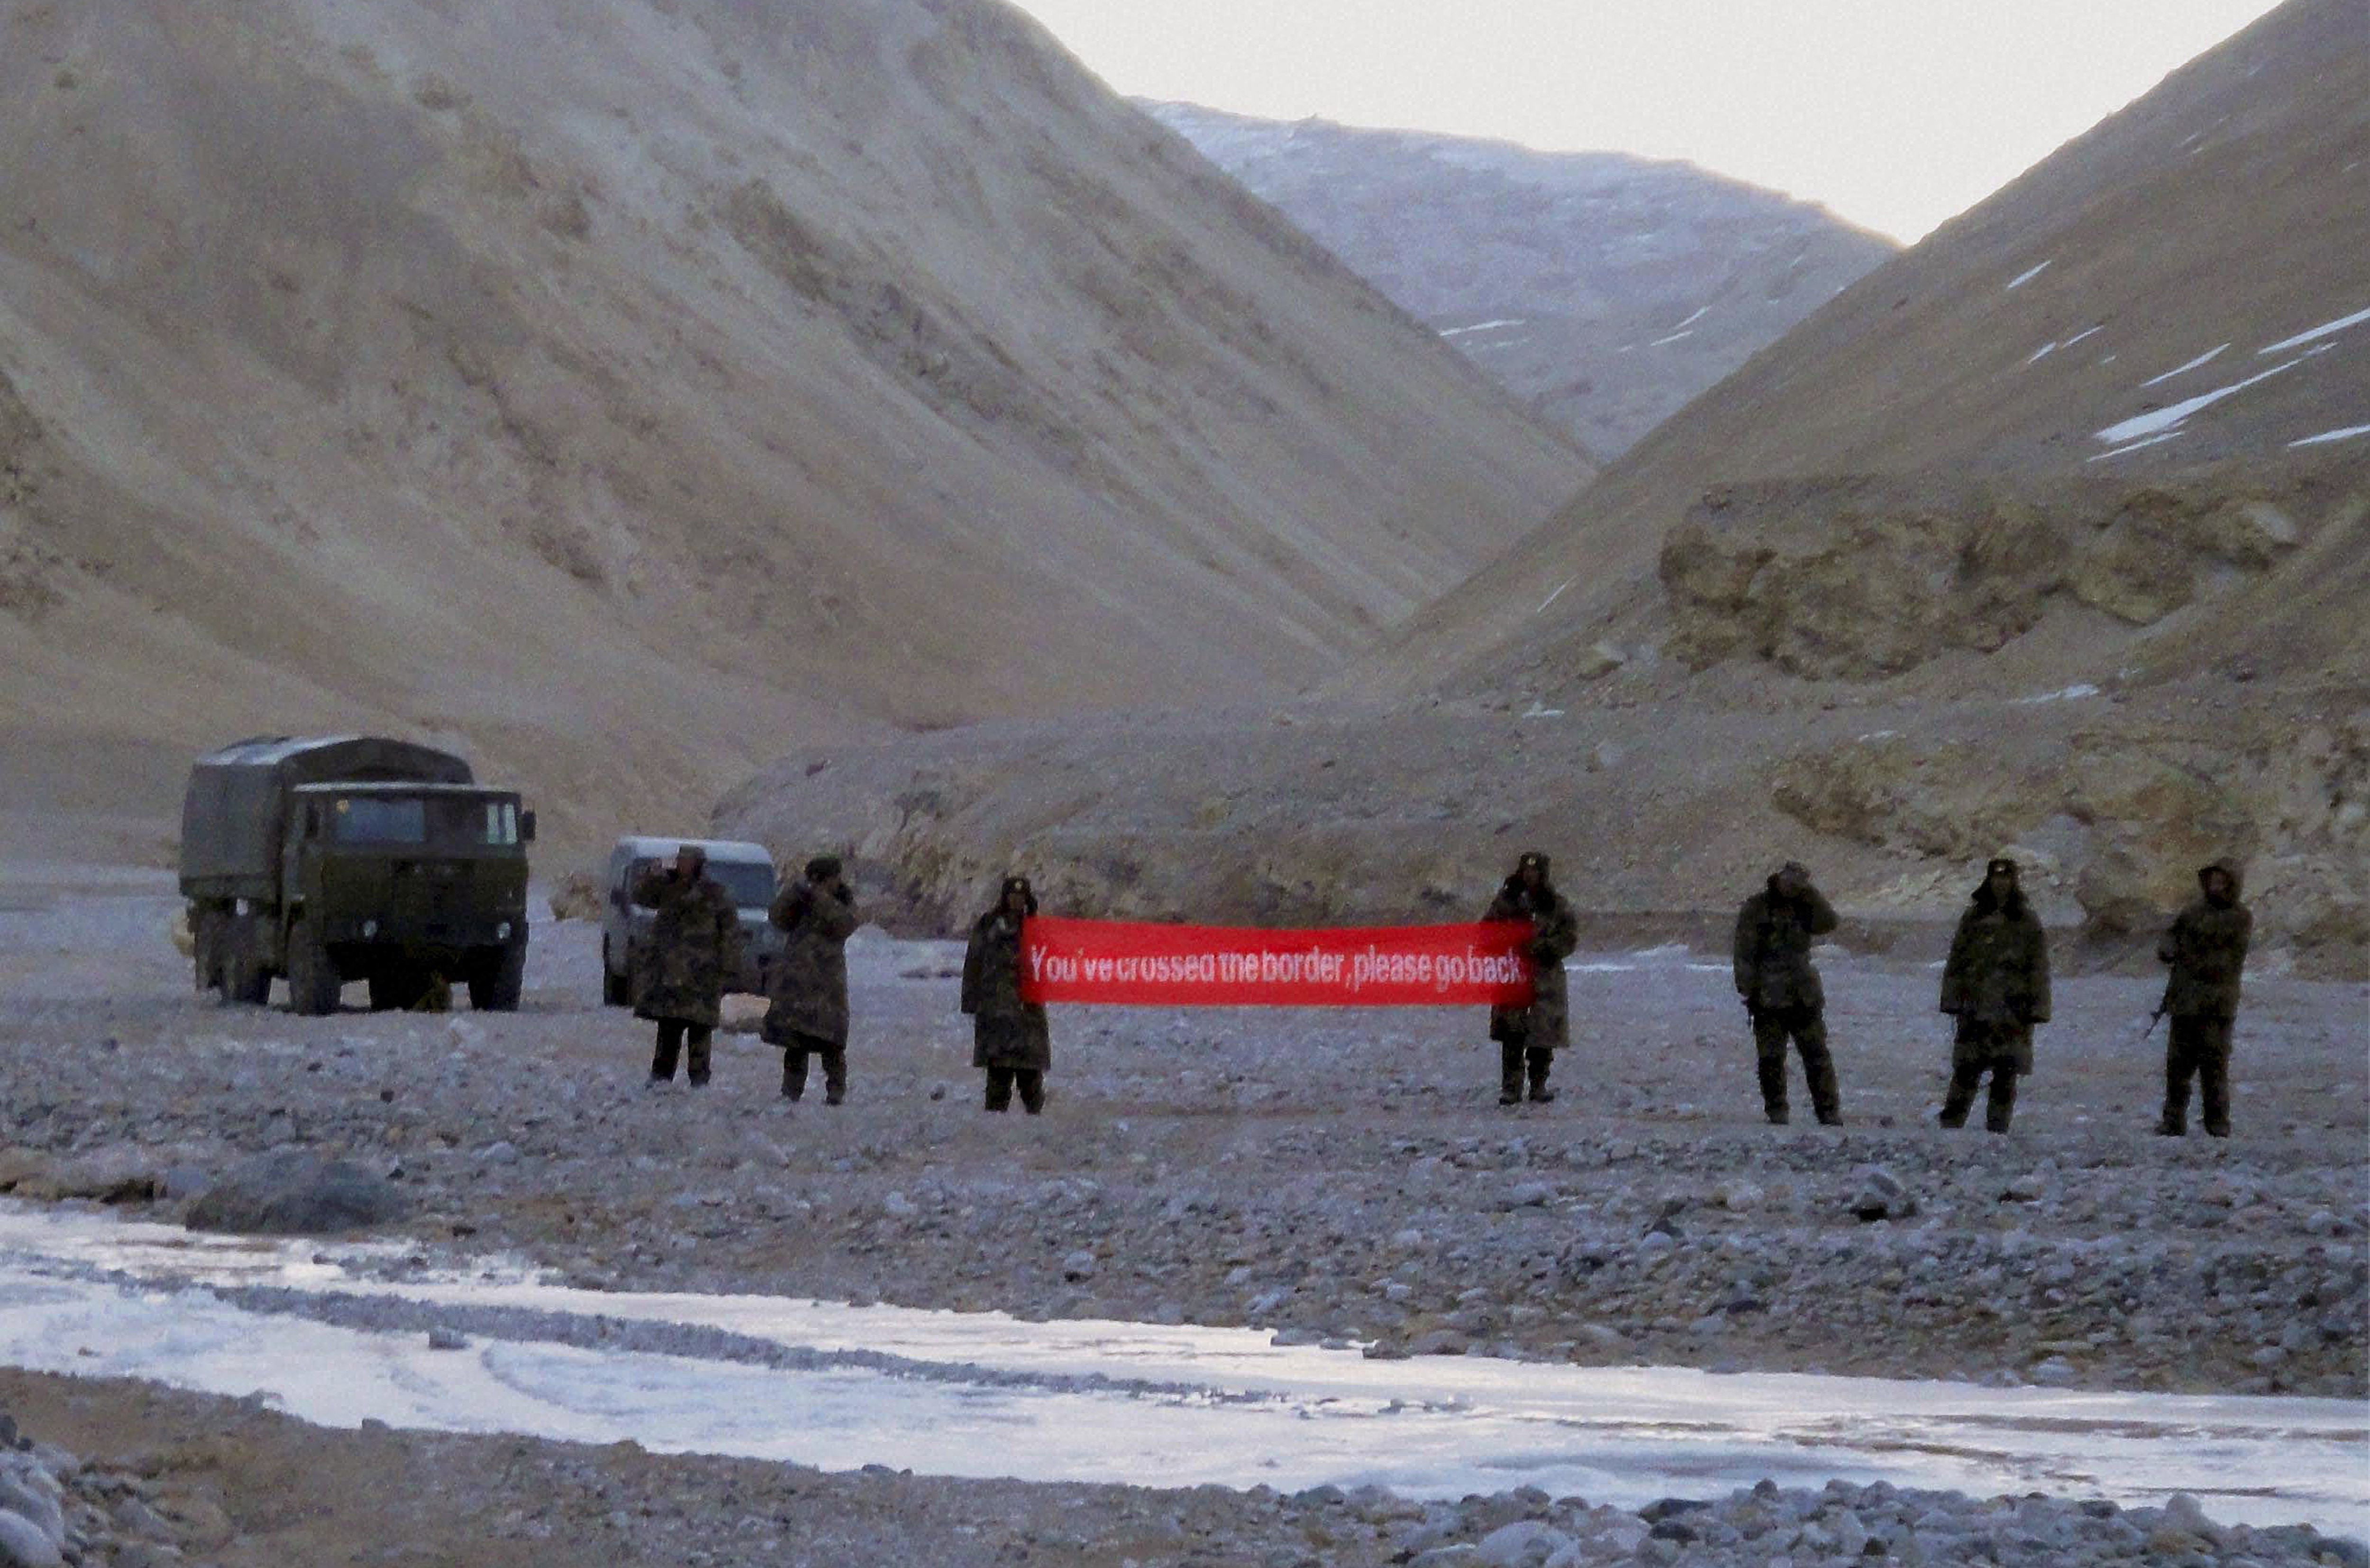 Indian soldiers on the border say they are quickly closing the capability gap with China and will not leave Bhutan to its fate